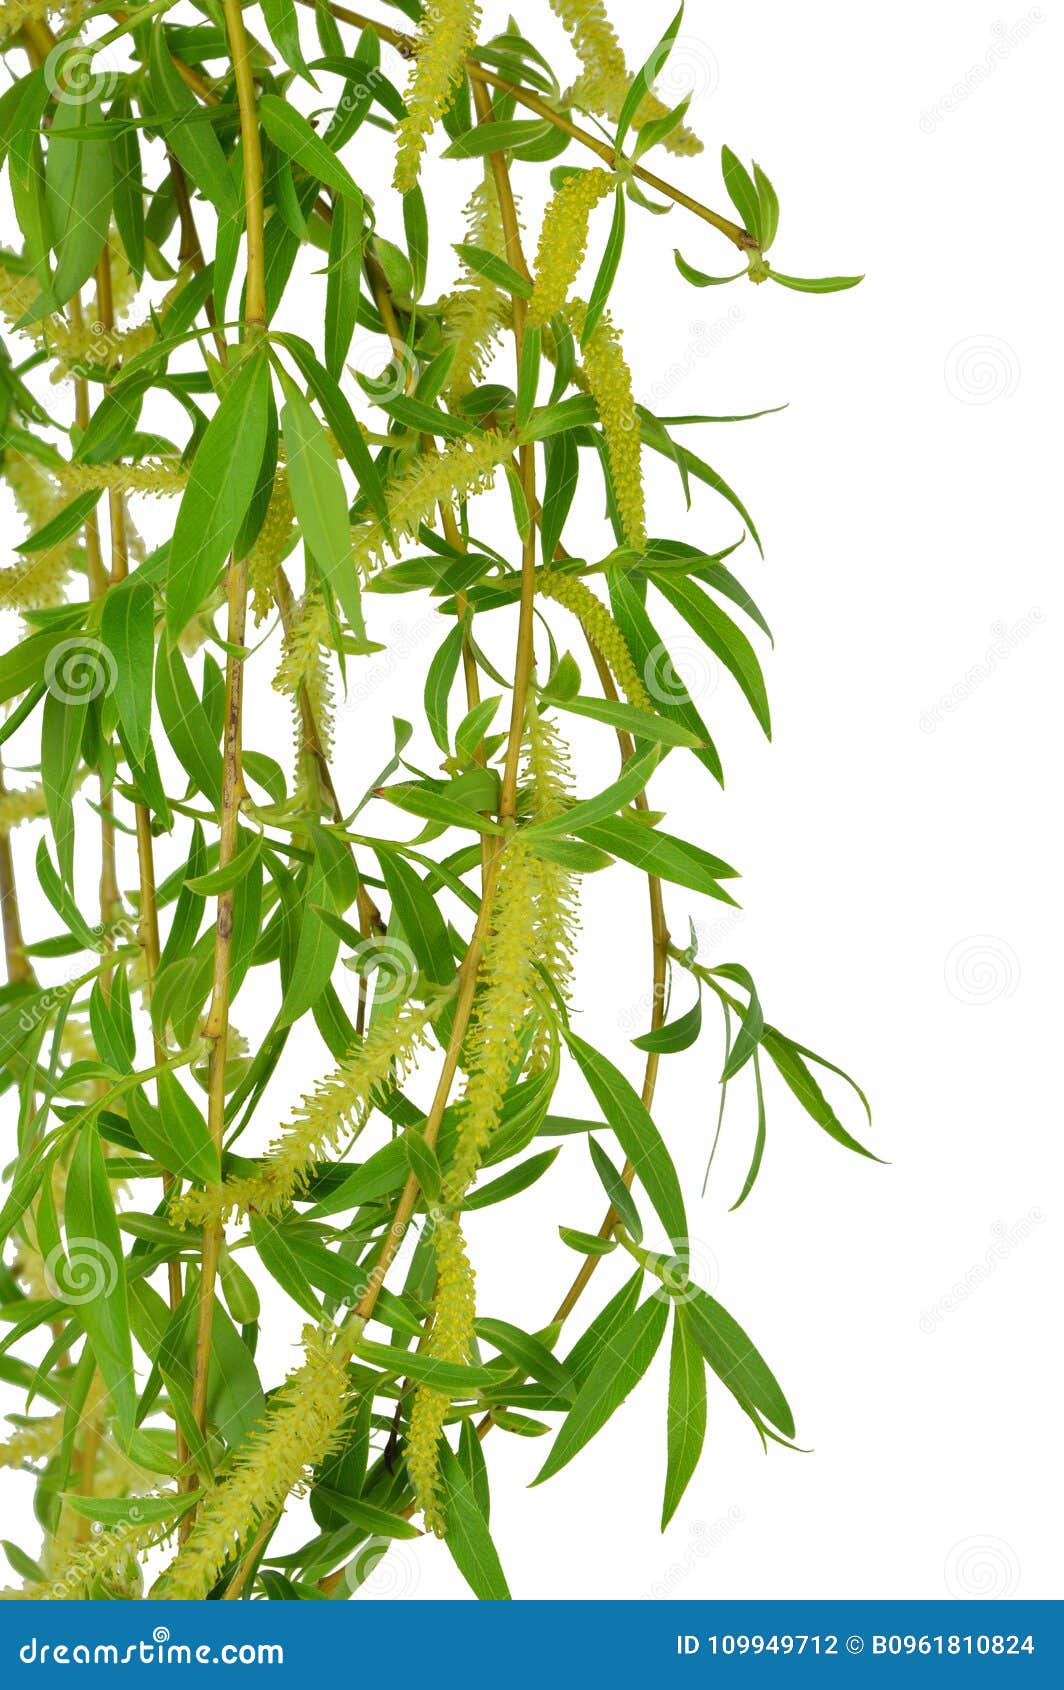 flowering willow and spring foliage. close-up.  without